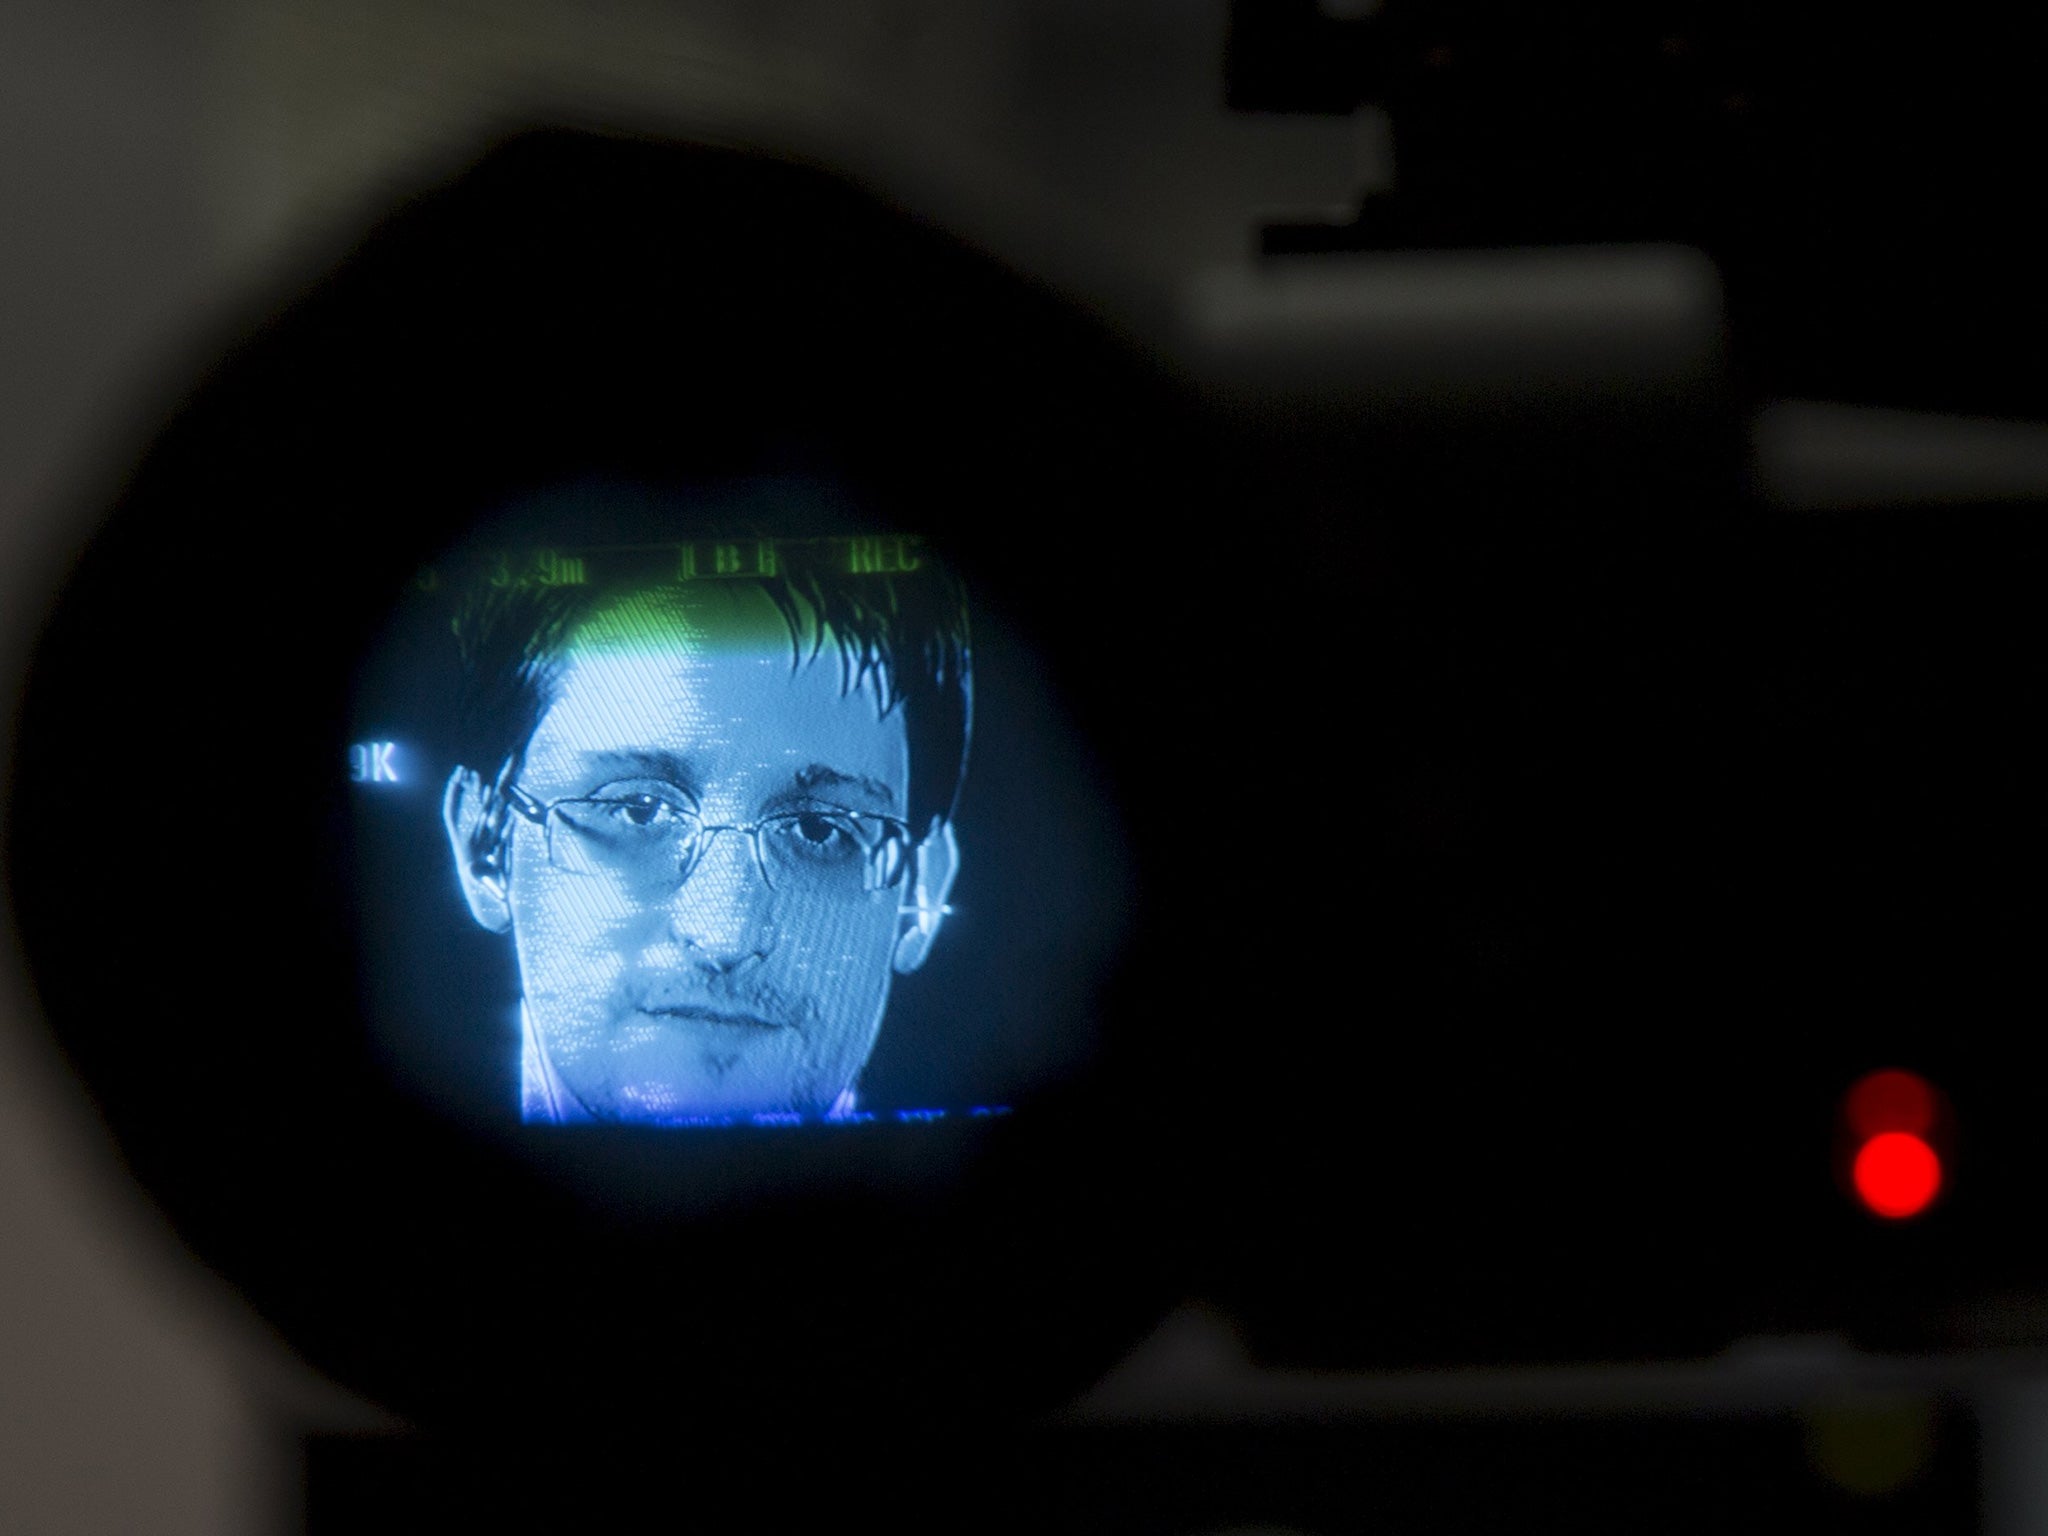 Edward Snowden is seen through a camera viewfinder as he delivers remarks via video link from Moscow to attendees at a discussion regarding an International Treaty on the Right to Privacy